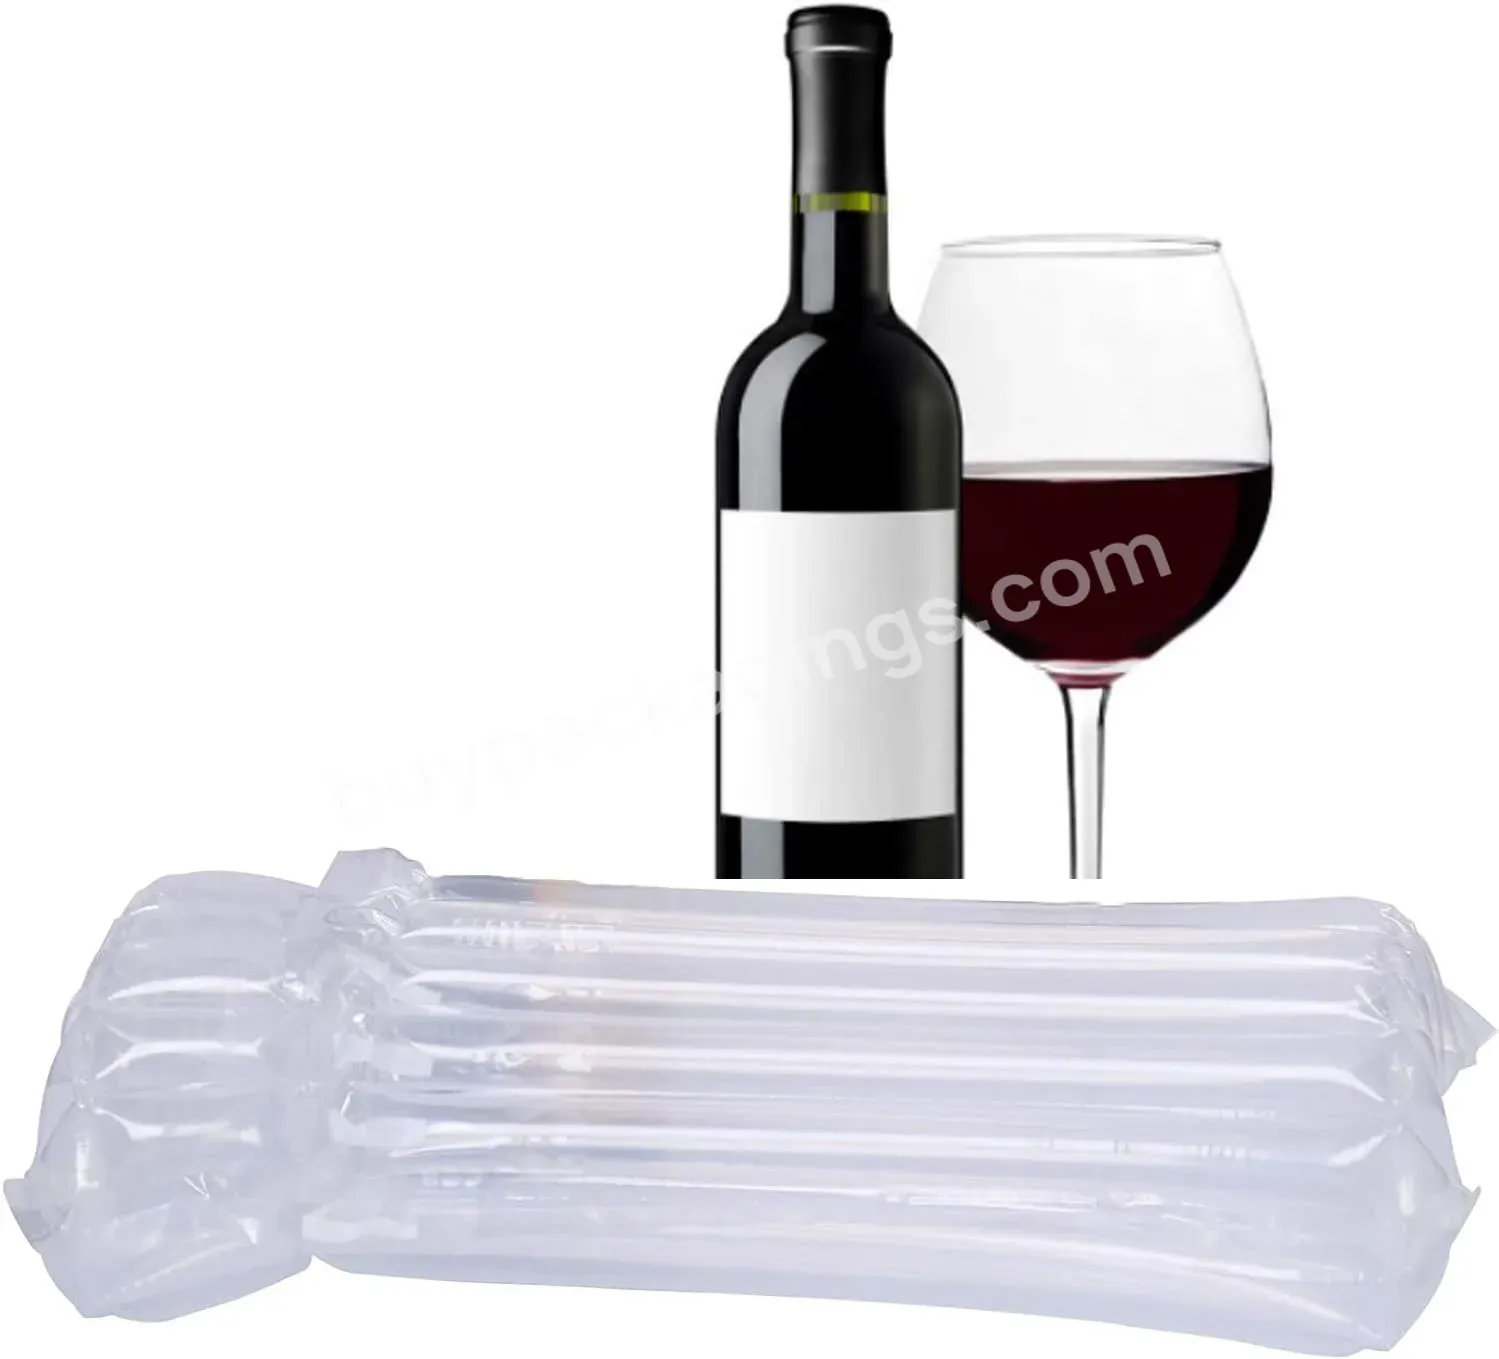 Wine Bottle Protector Bags Bubble Cushion Wrap Airplane Travel,Safety Shipping Packaging Bags For Glass Bottles In Transport - Buy Air Bags,Air Column Bags Packaging,Inflatable Air Column Bag.